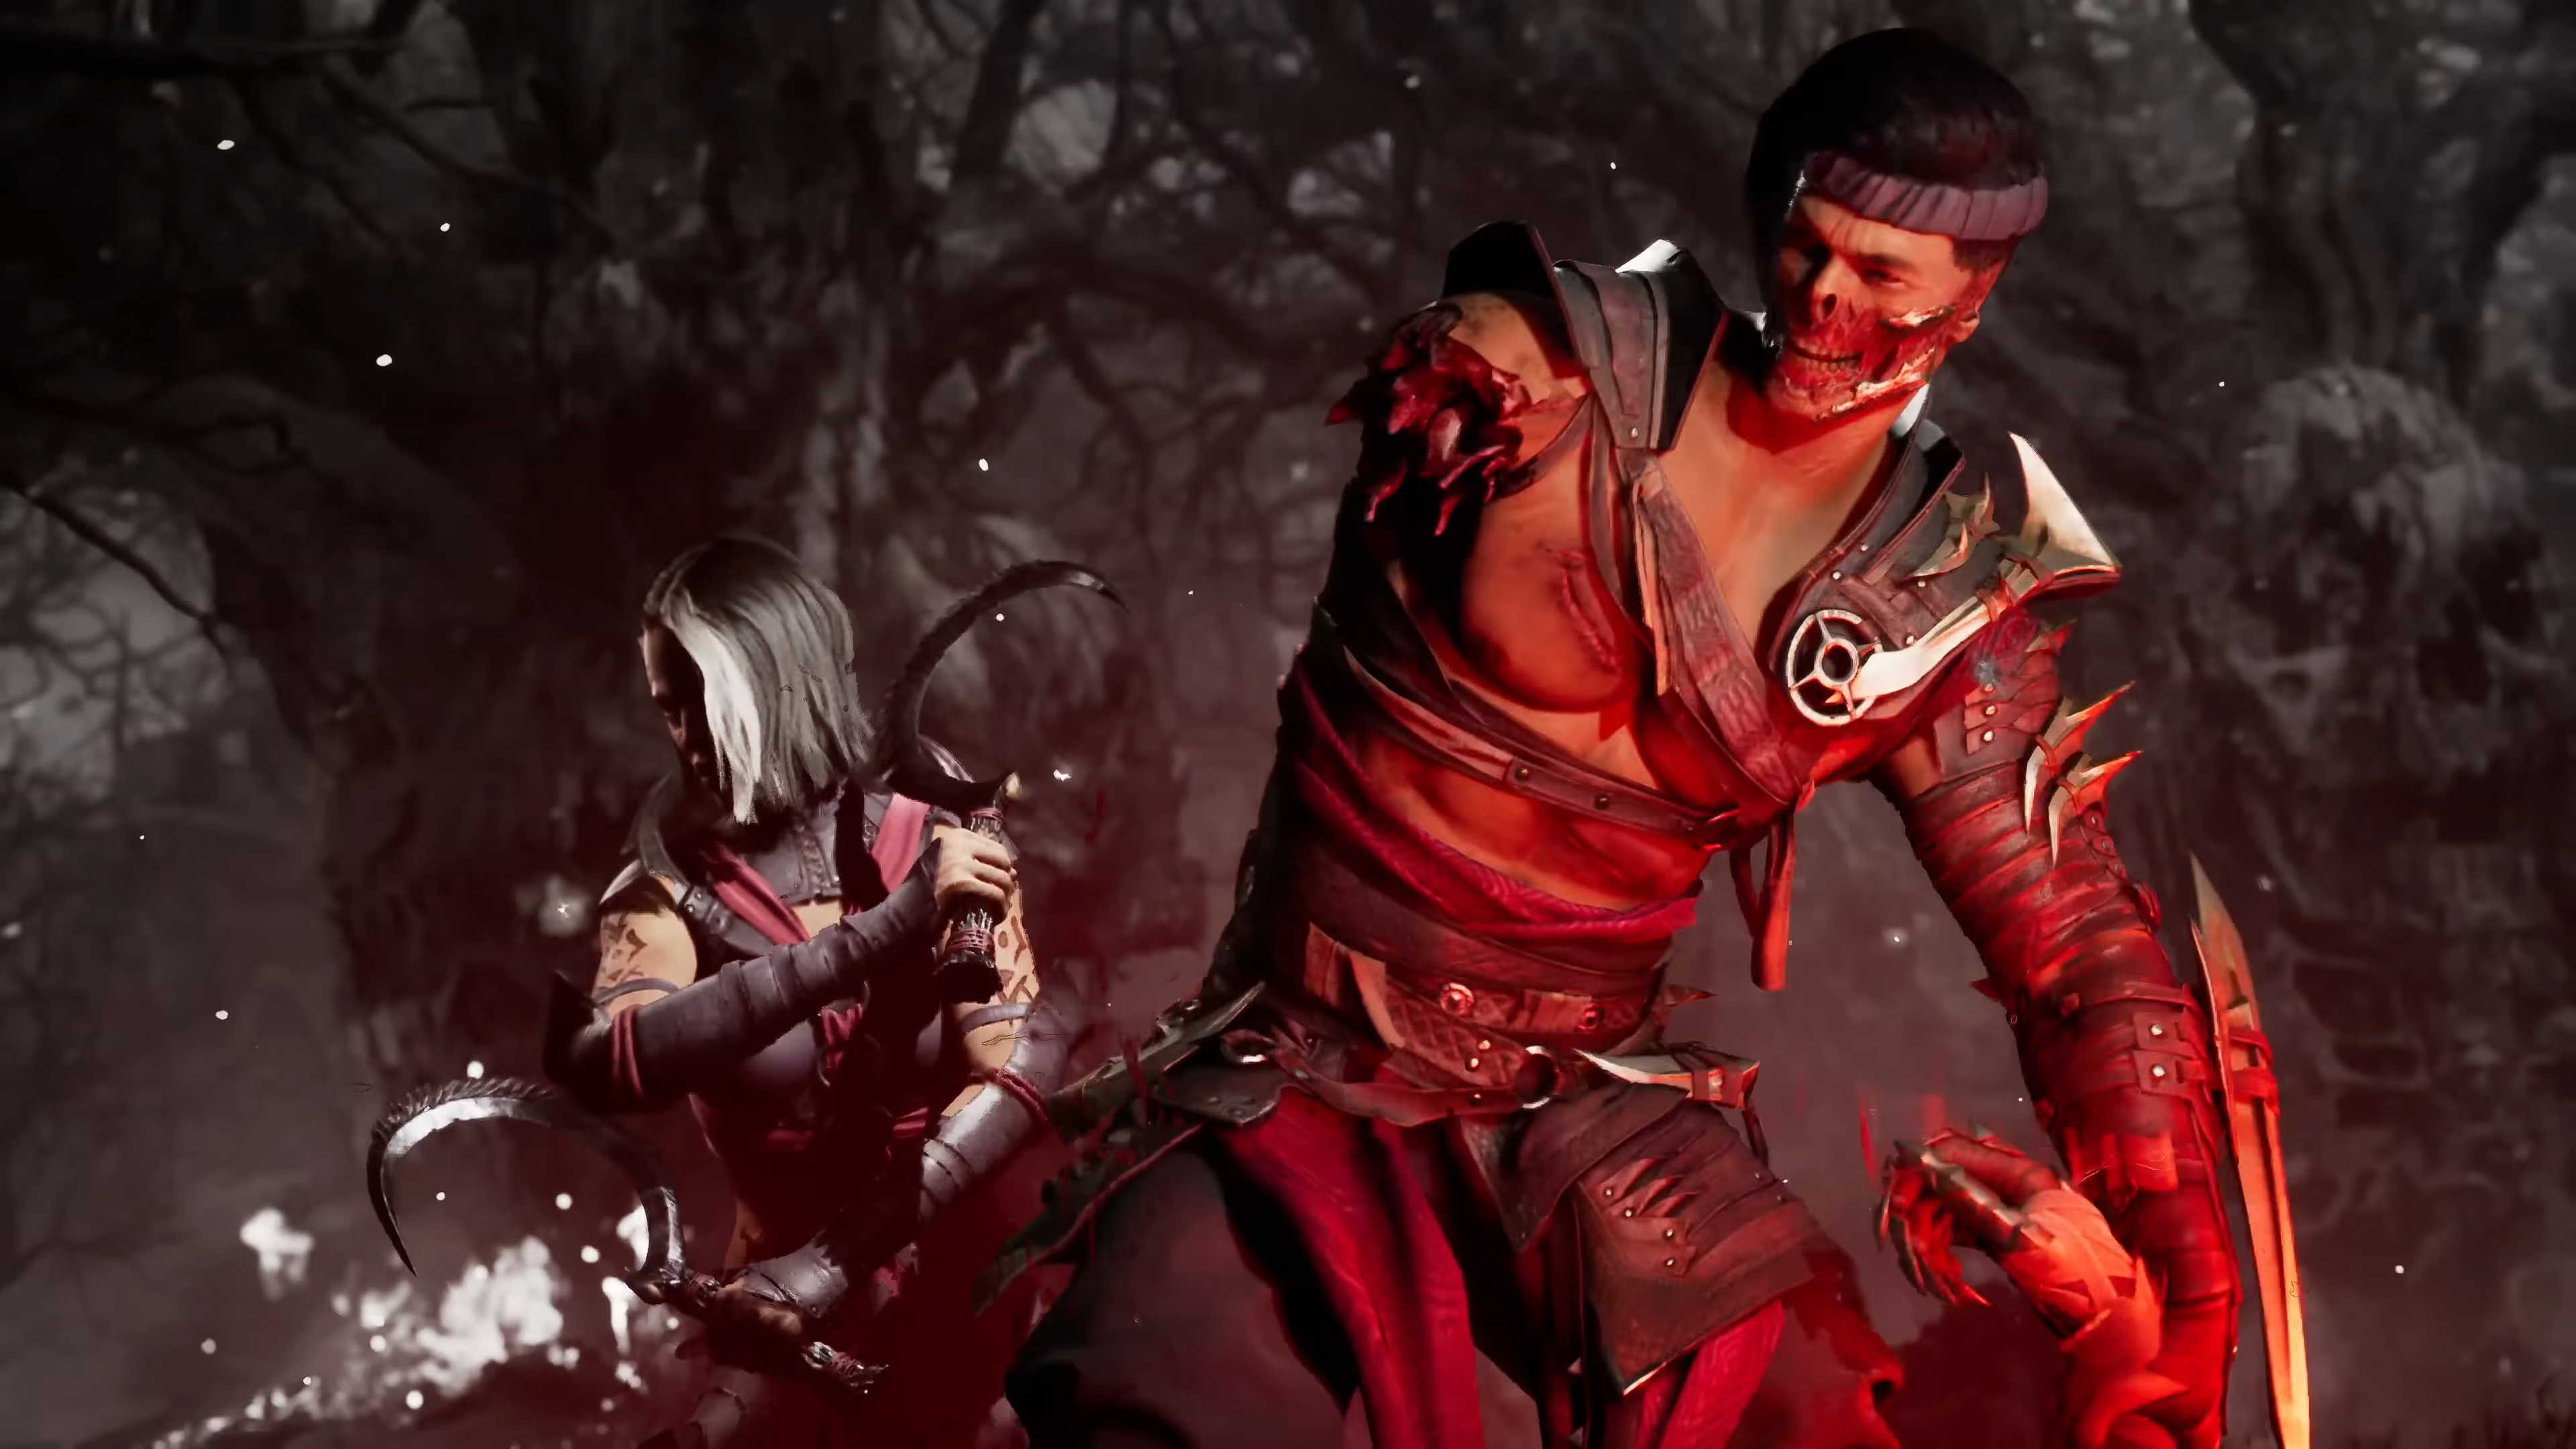 Mortal Kombat 1 is bringing back Havik, the guy who tears his own arm off and hits you with it